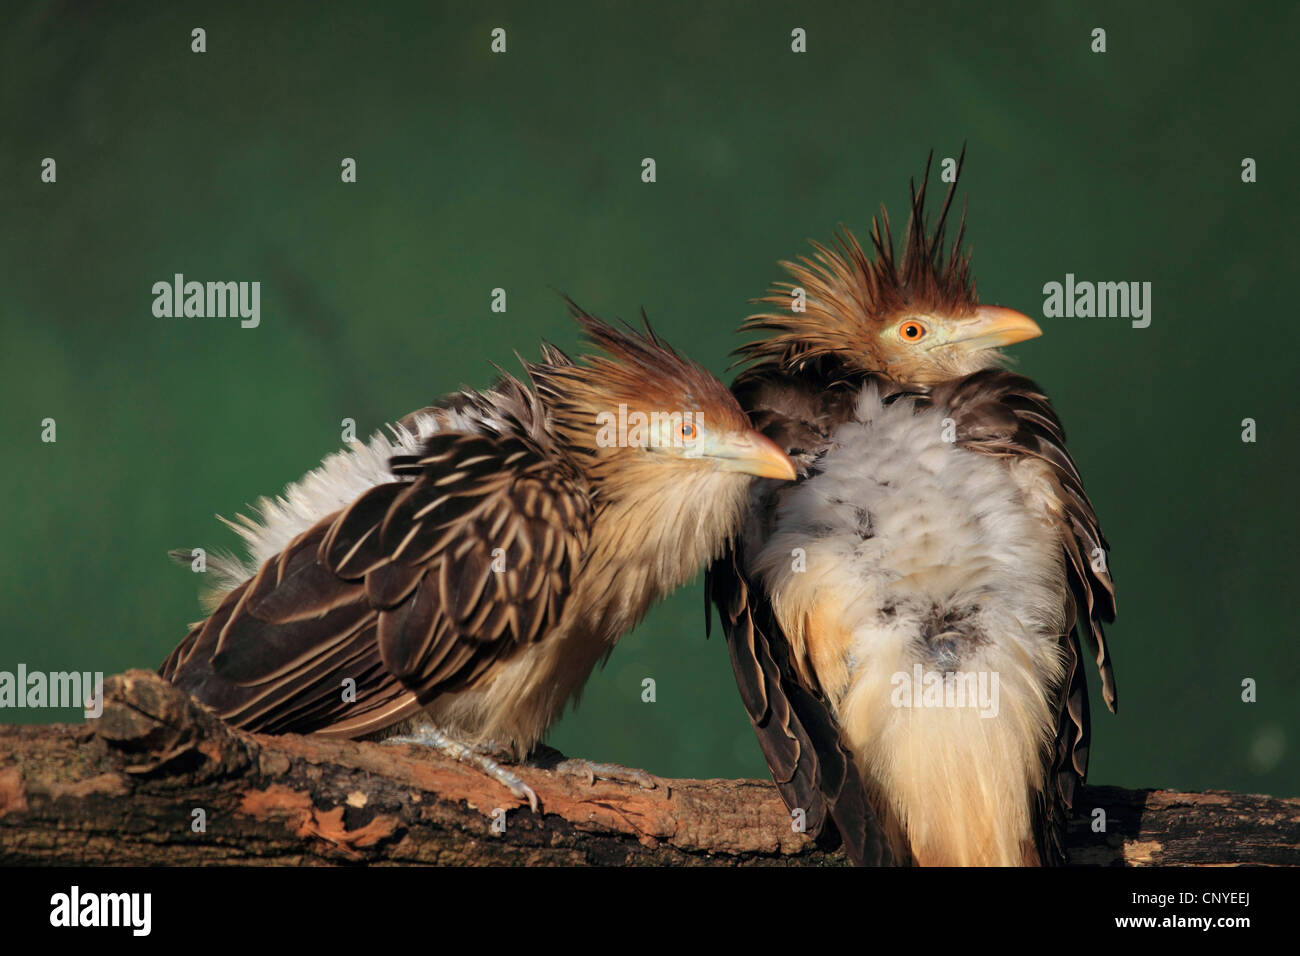 guira cuckoo (Guira guira), two birds sitting together on a branch Stock Photo